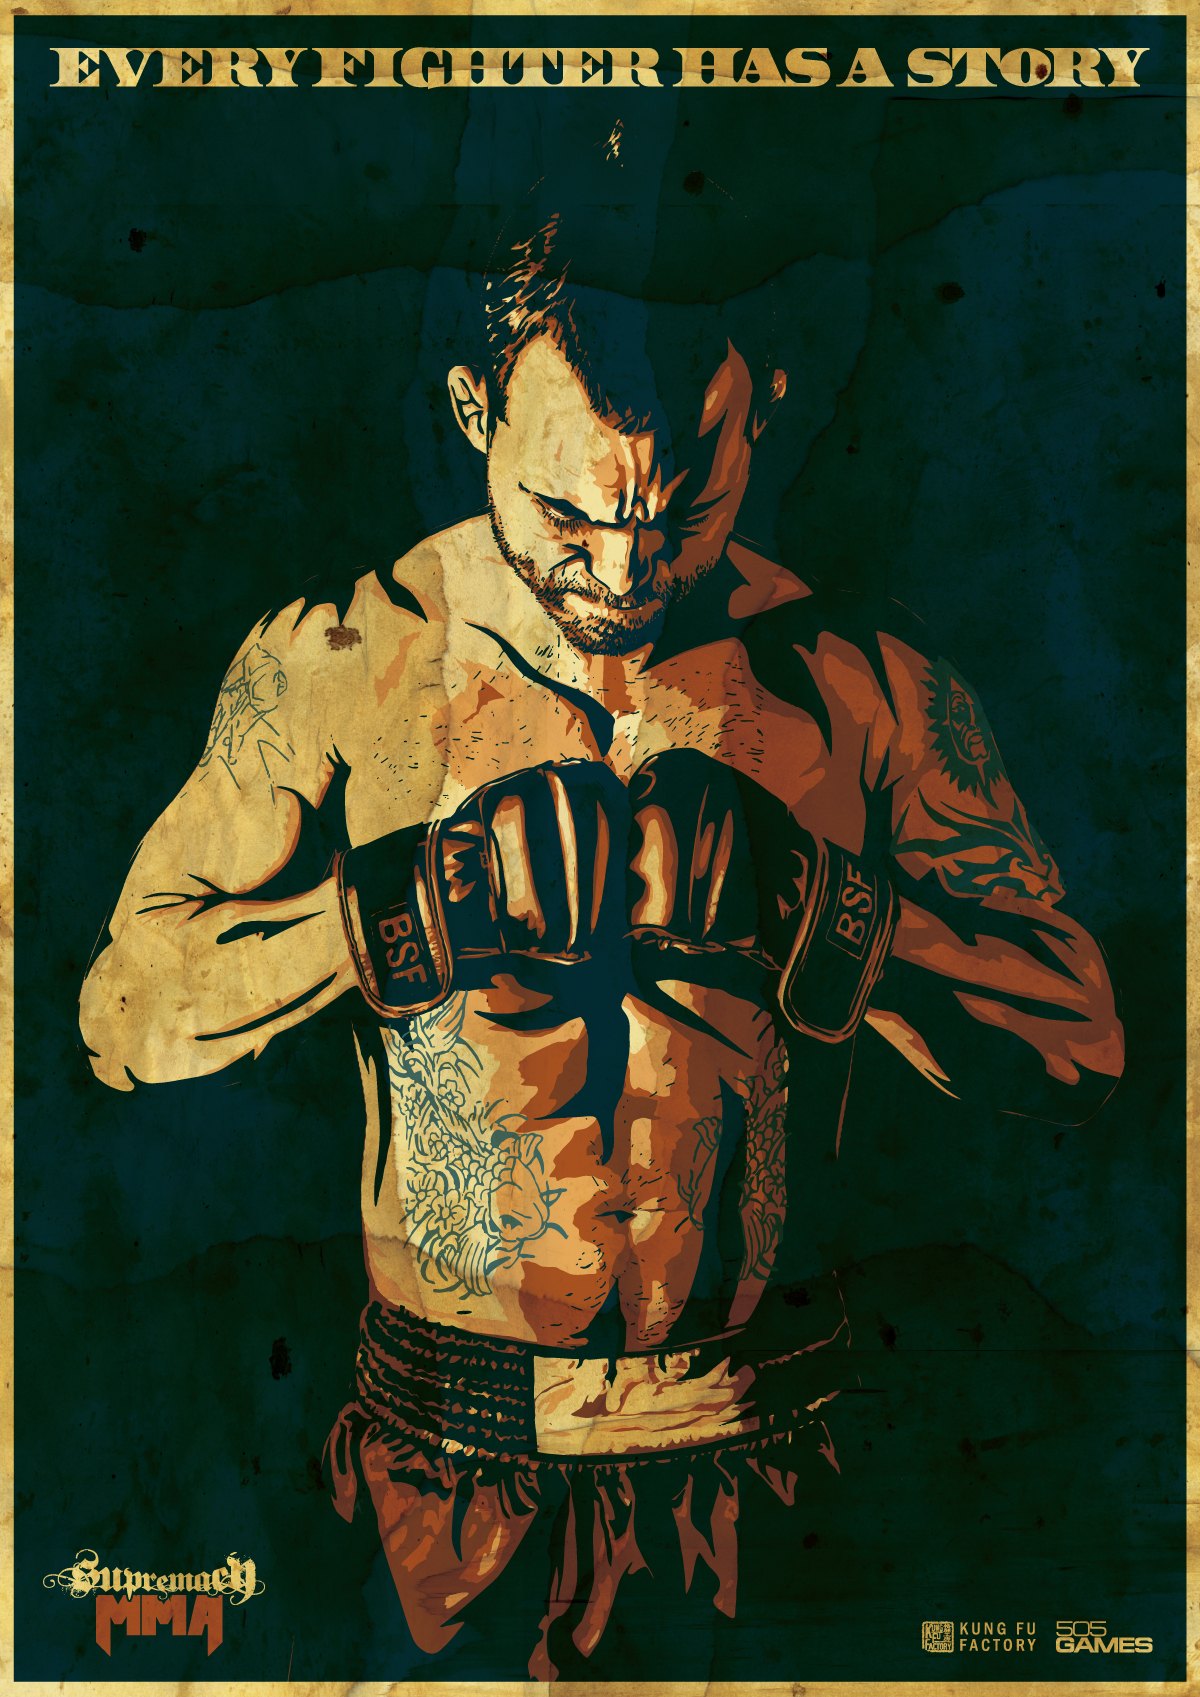 Jens 'Lil' Evil' Pulver is featured in the fighting sports game titled Supremacy MMA.